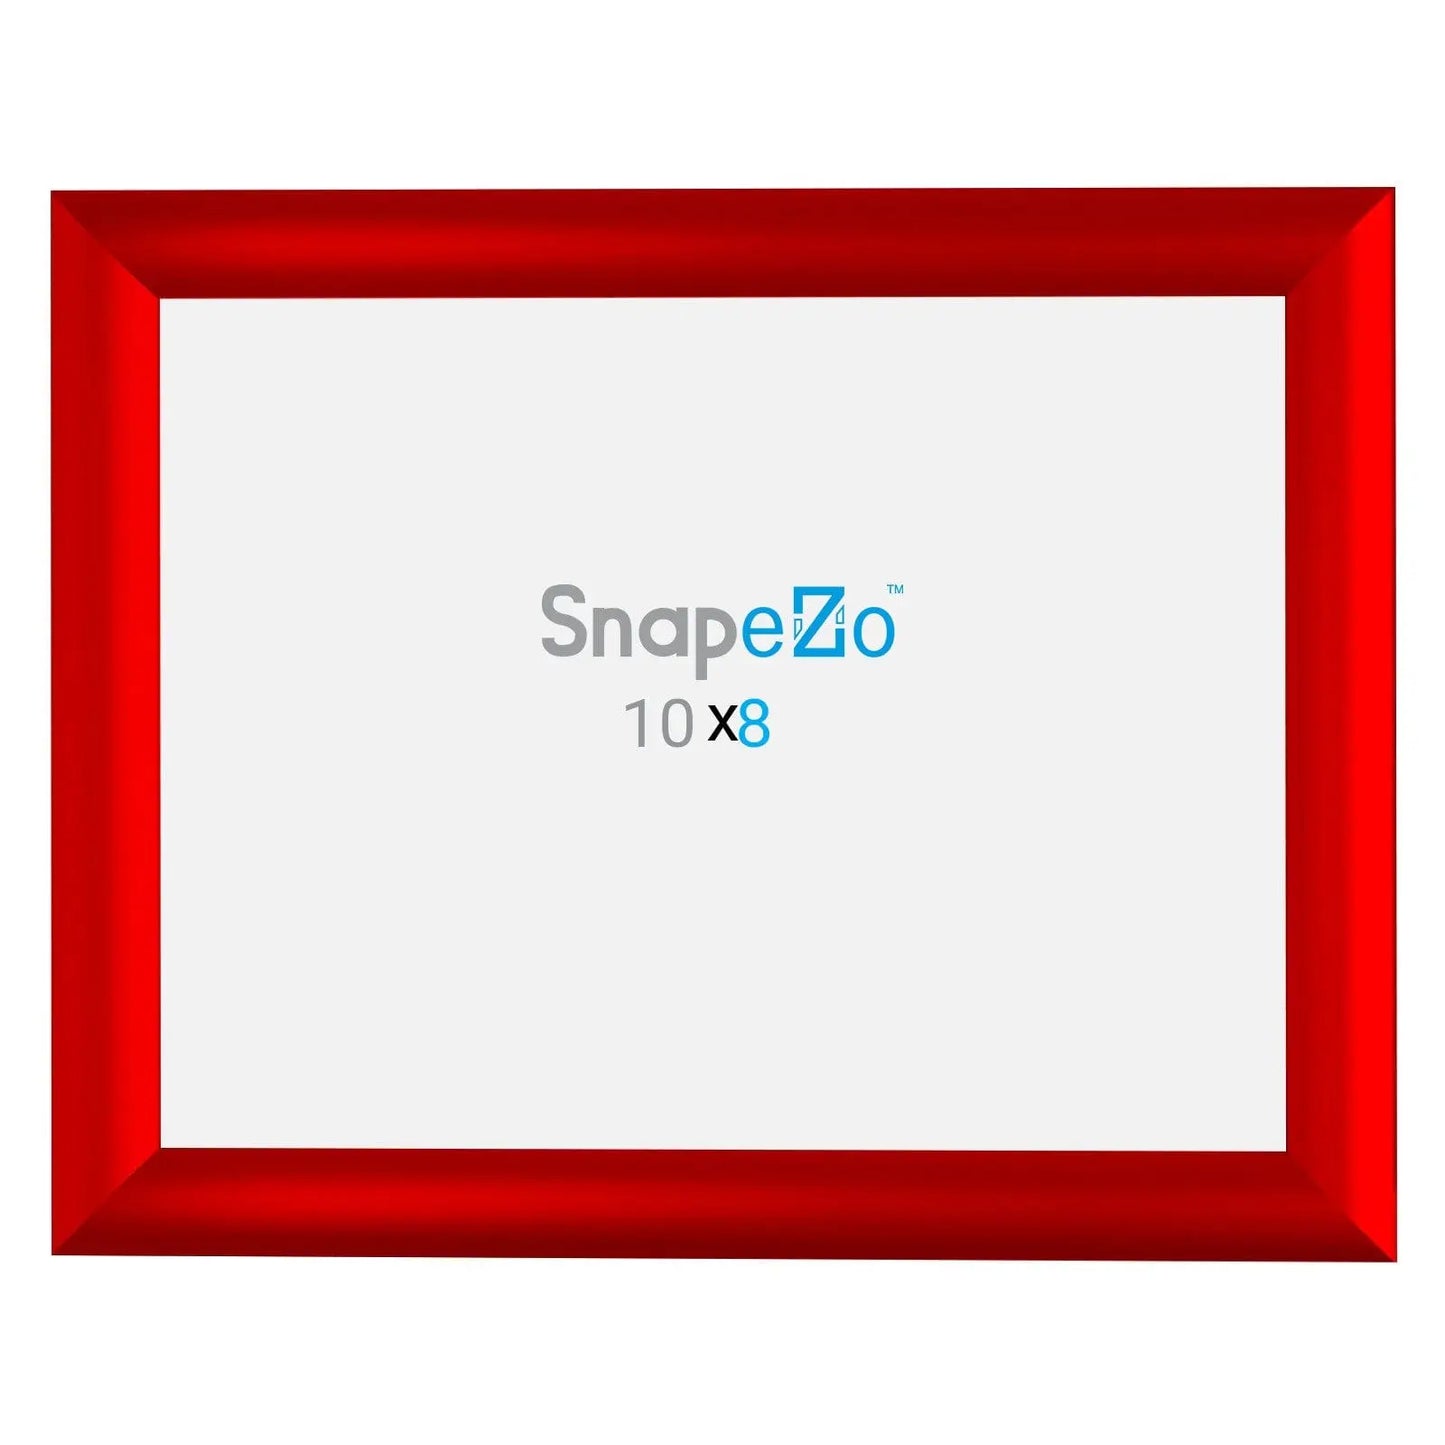 8x10 Red SnapeZo® Snap Frame - 1" Profile - Snap Frames Direct